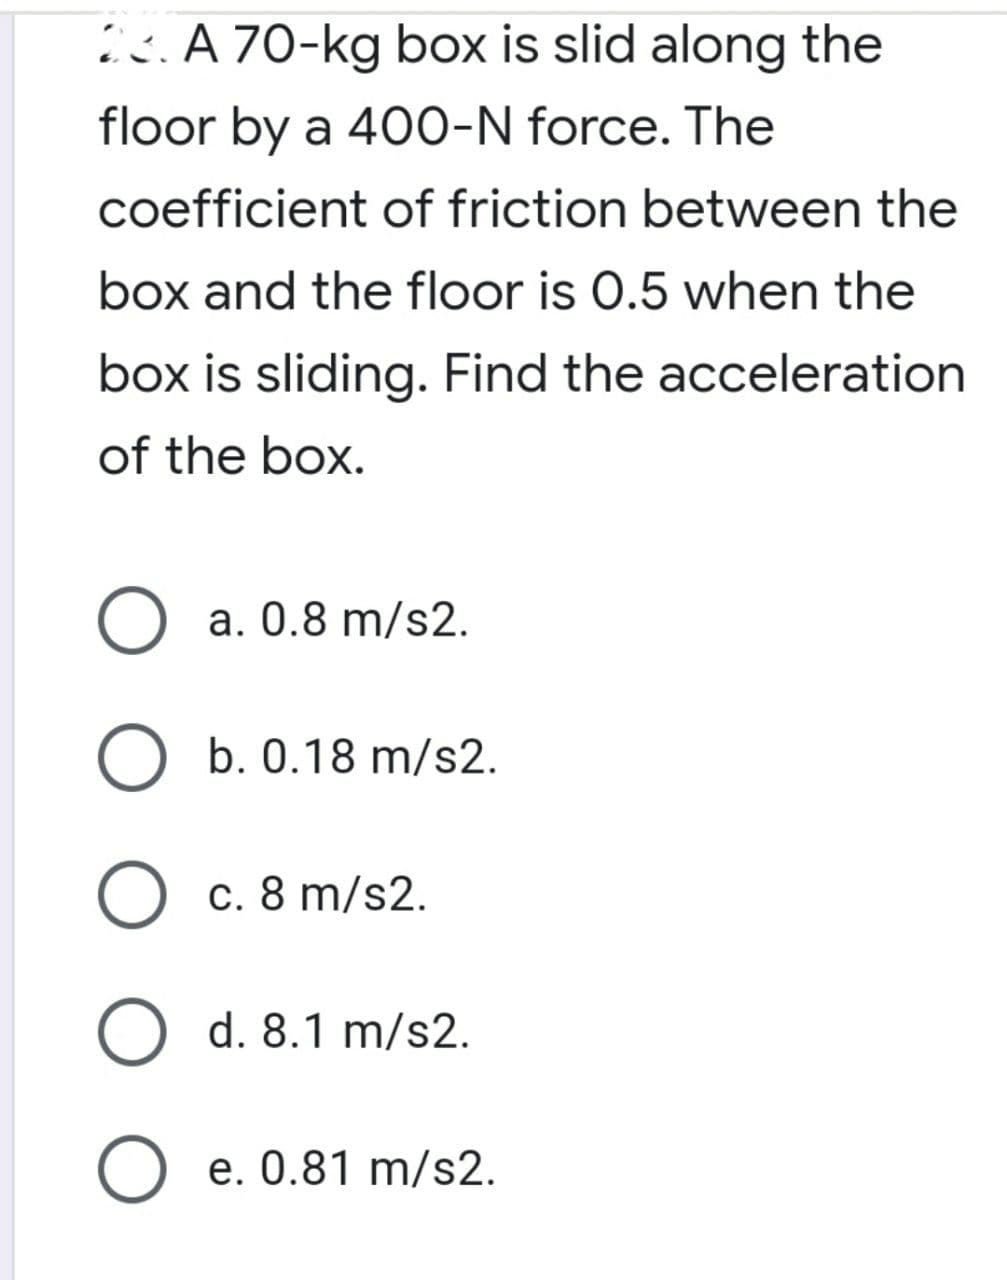 ic.A 70-kg box is slid along the
floor by a 400-N force. The
coefficient of friction between the
box and the floor is 0.5 when the
box is sliding. Find the acceleration
of the box.
O a. 0.8 m/s2.
b. 0.18 m/s2.
c. 8 m/s2.
O d. 8.1 m/s2.
O e. 0.81 m/s2.
